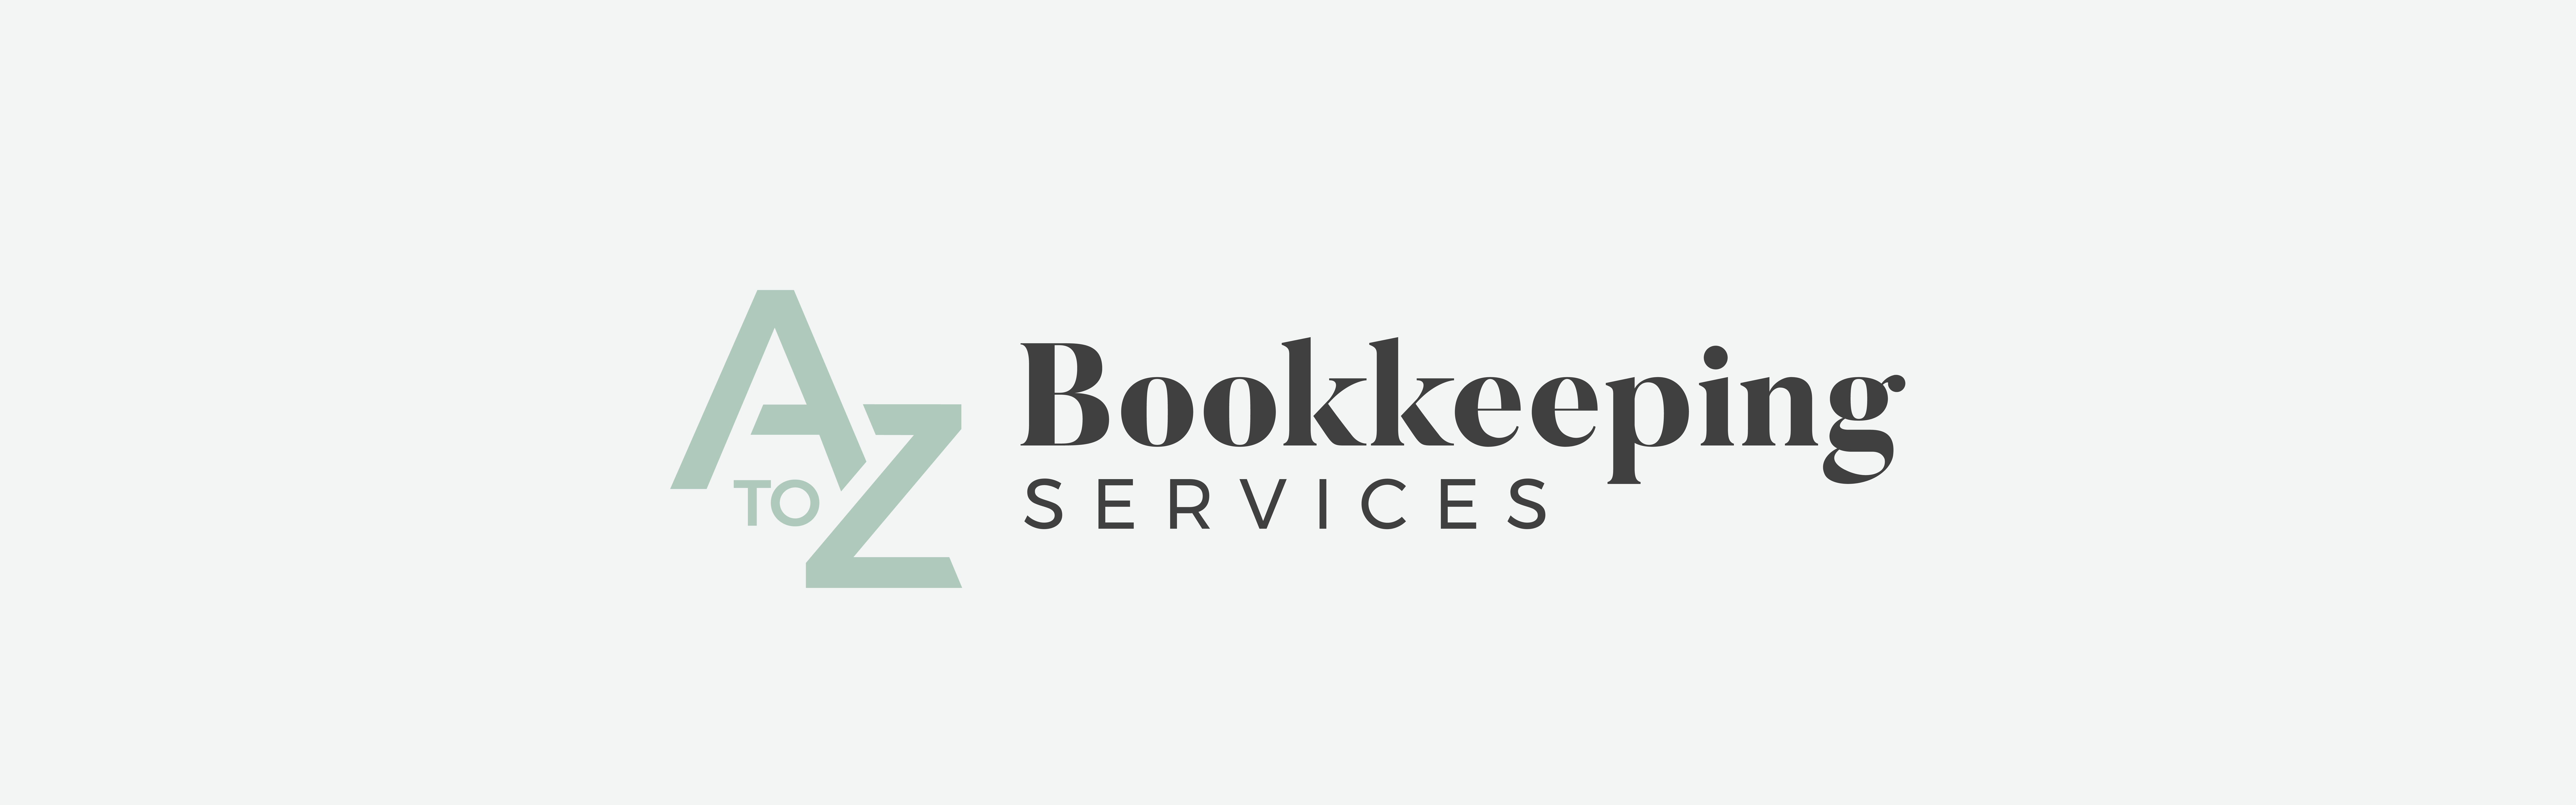 Logo of A to Z Bookkeeping featuring stylized letters "a" and "z" with the text "Bookkeeping Services" aligned to the right.